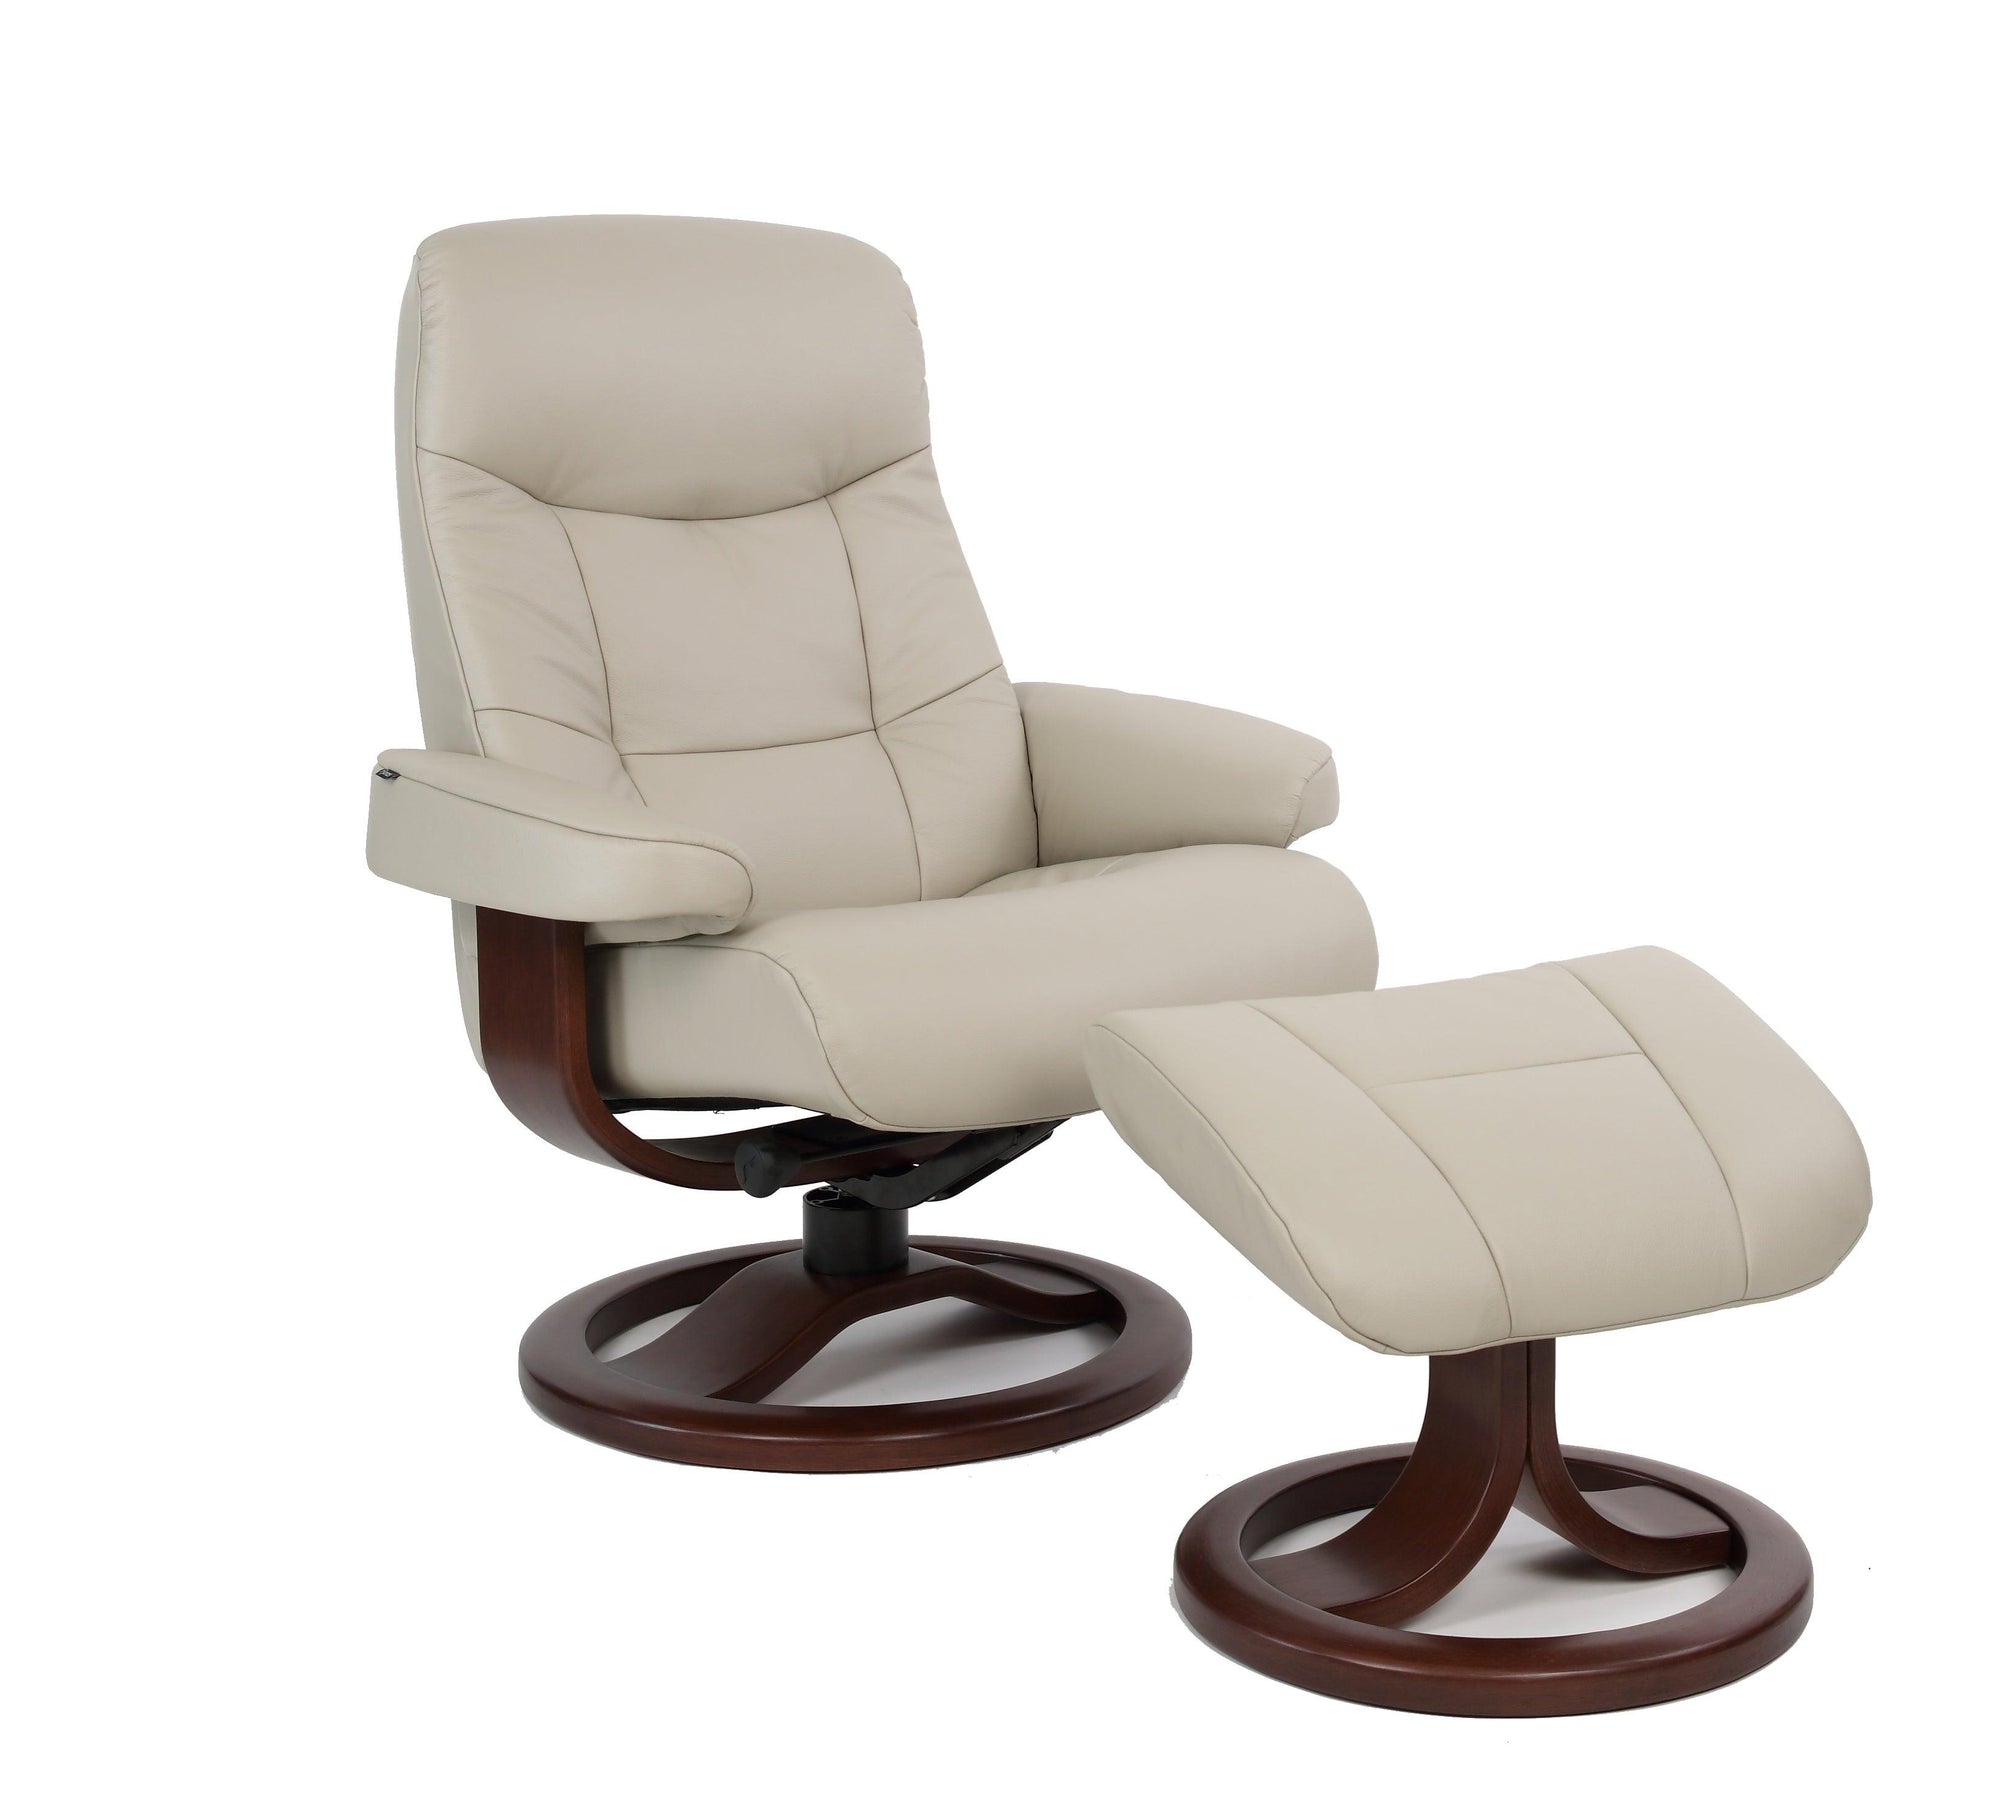 Muldal R Leather Reclining Chair in Dove - Euro Living Furniture